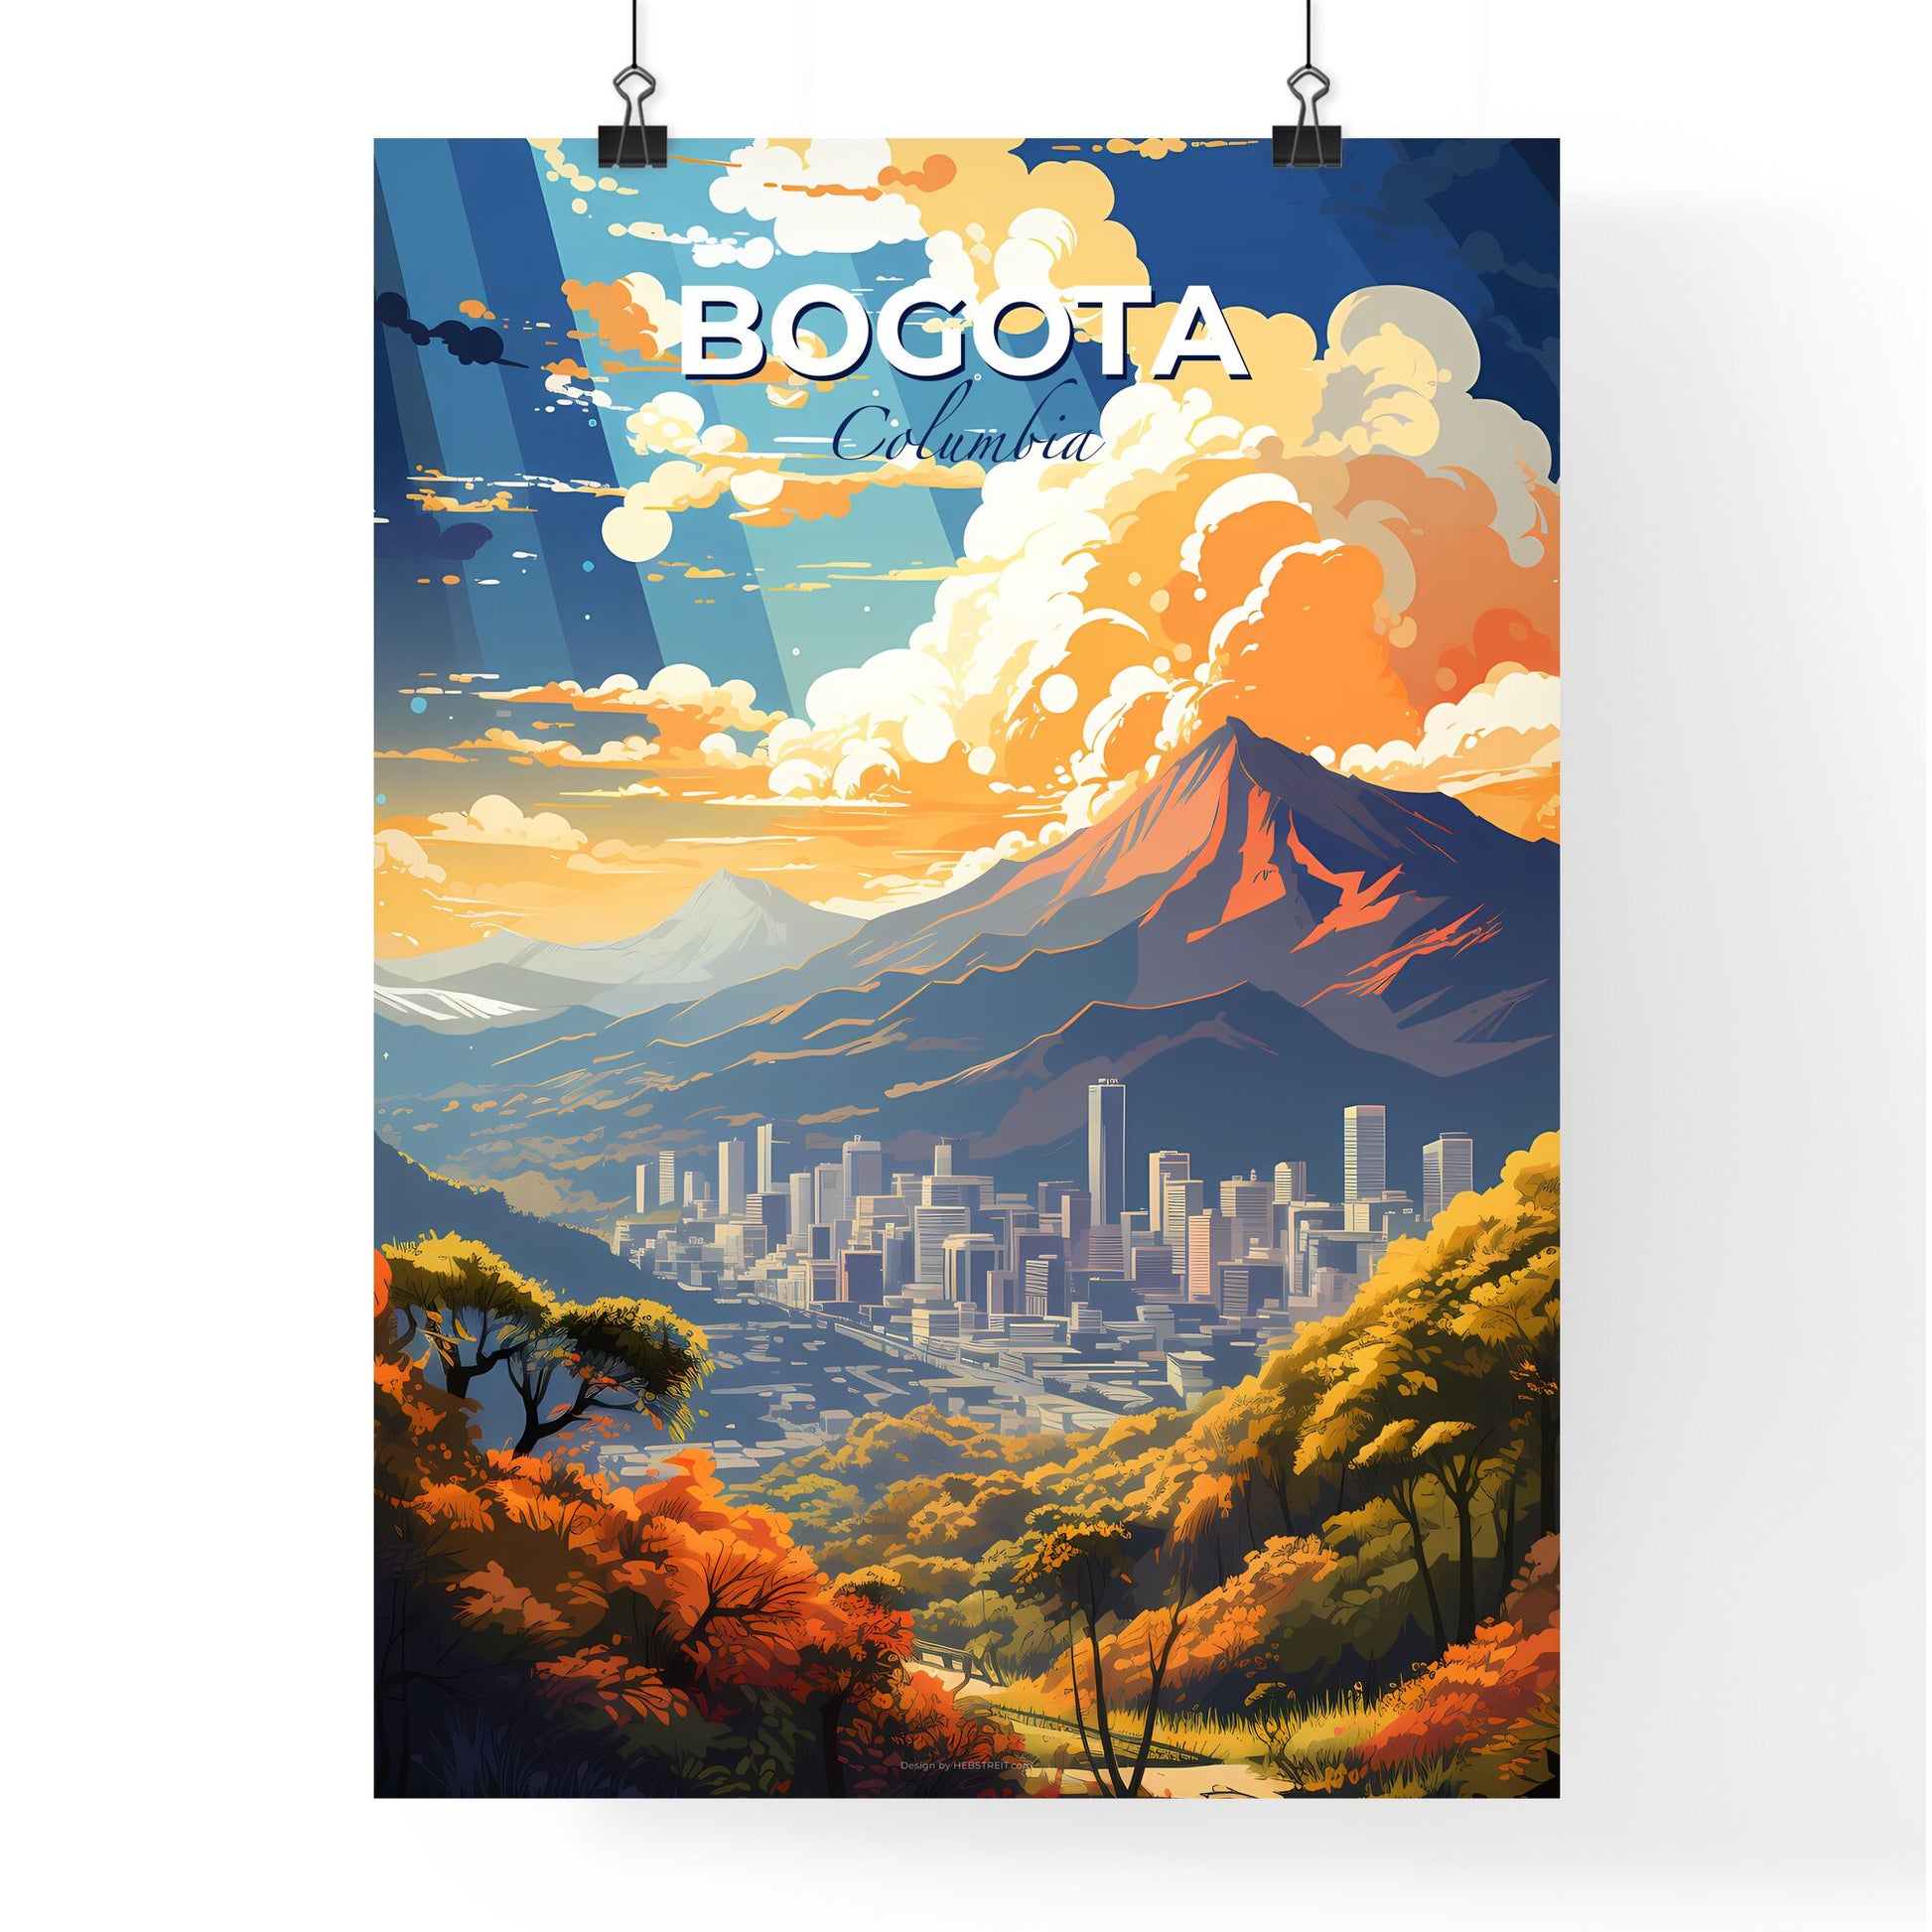 Bogota Columbia Skyline - A Landscape Of A City And Mountains - Customizable Travel Gift Default Title